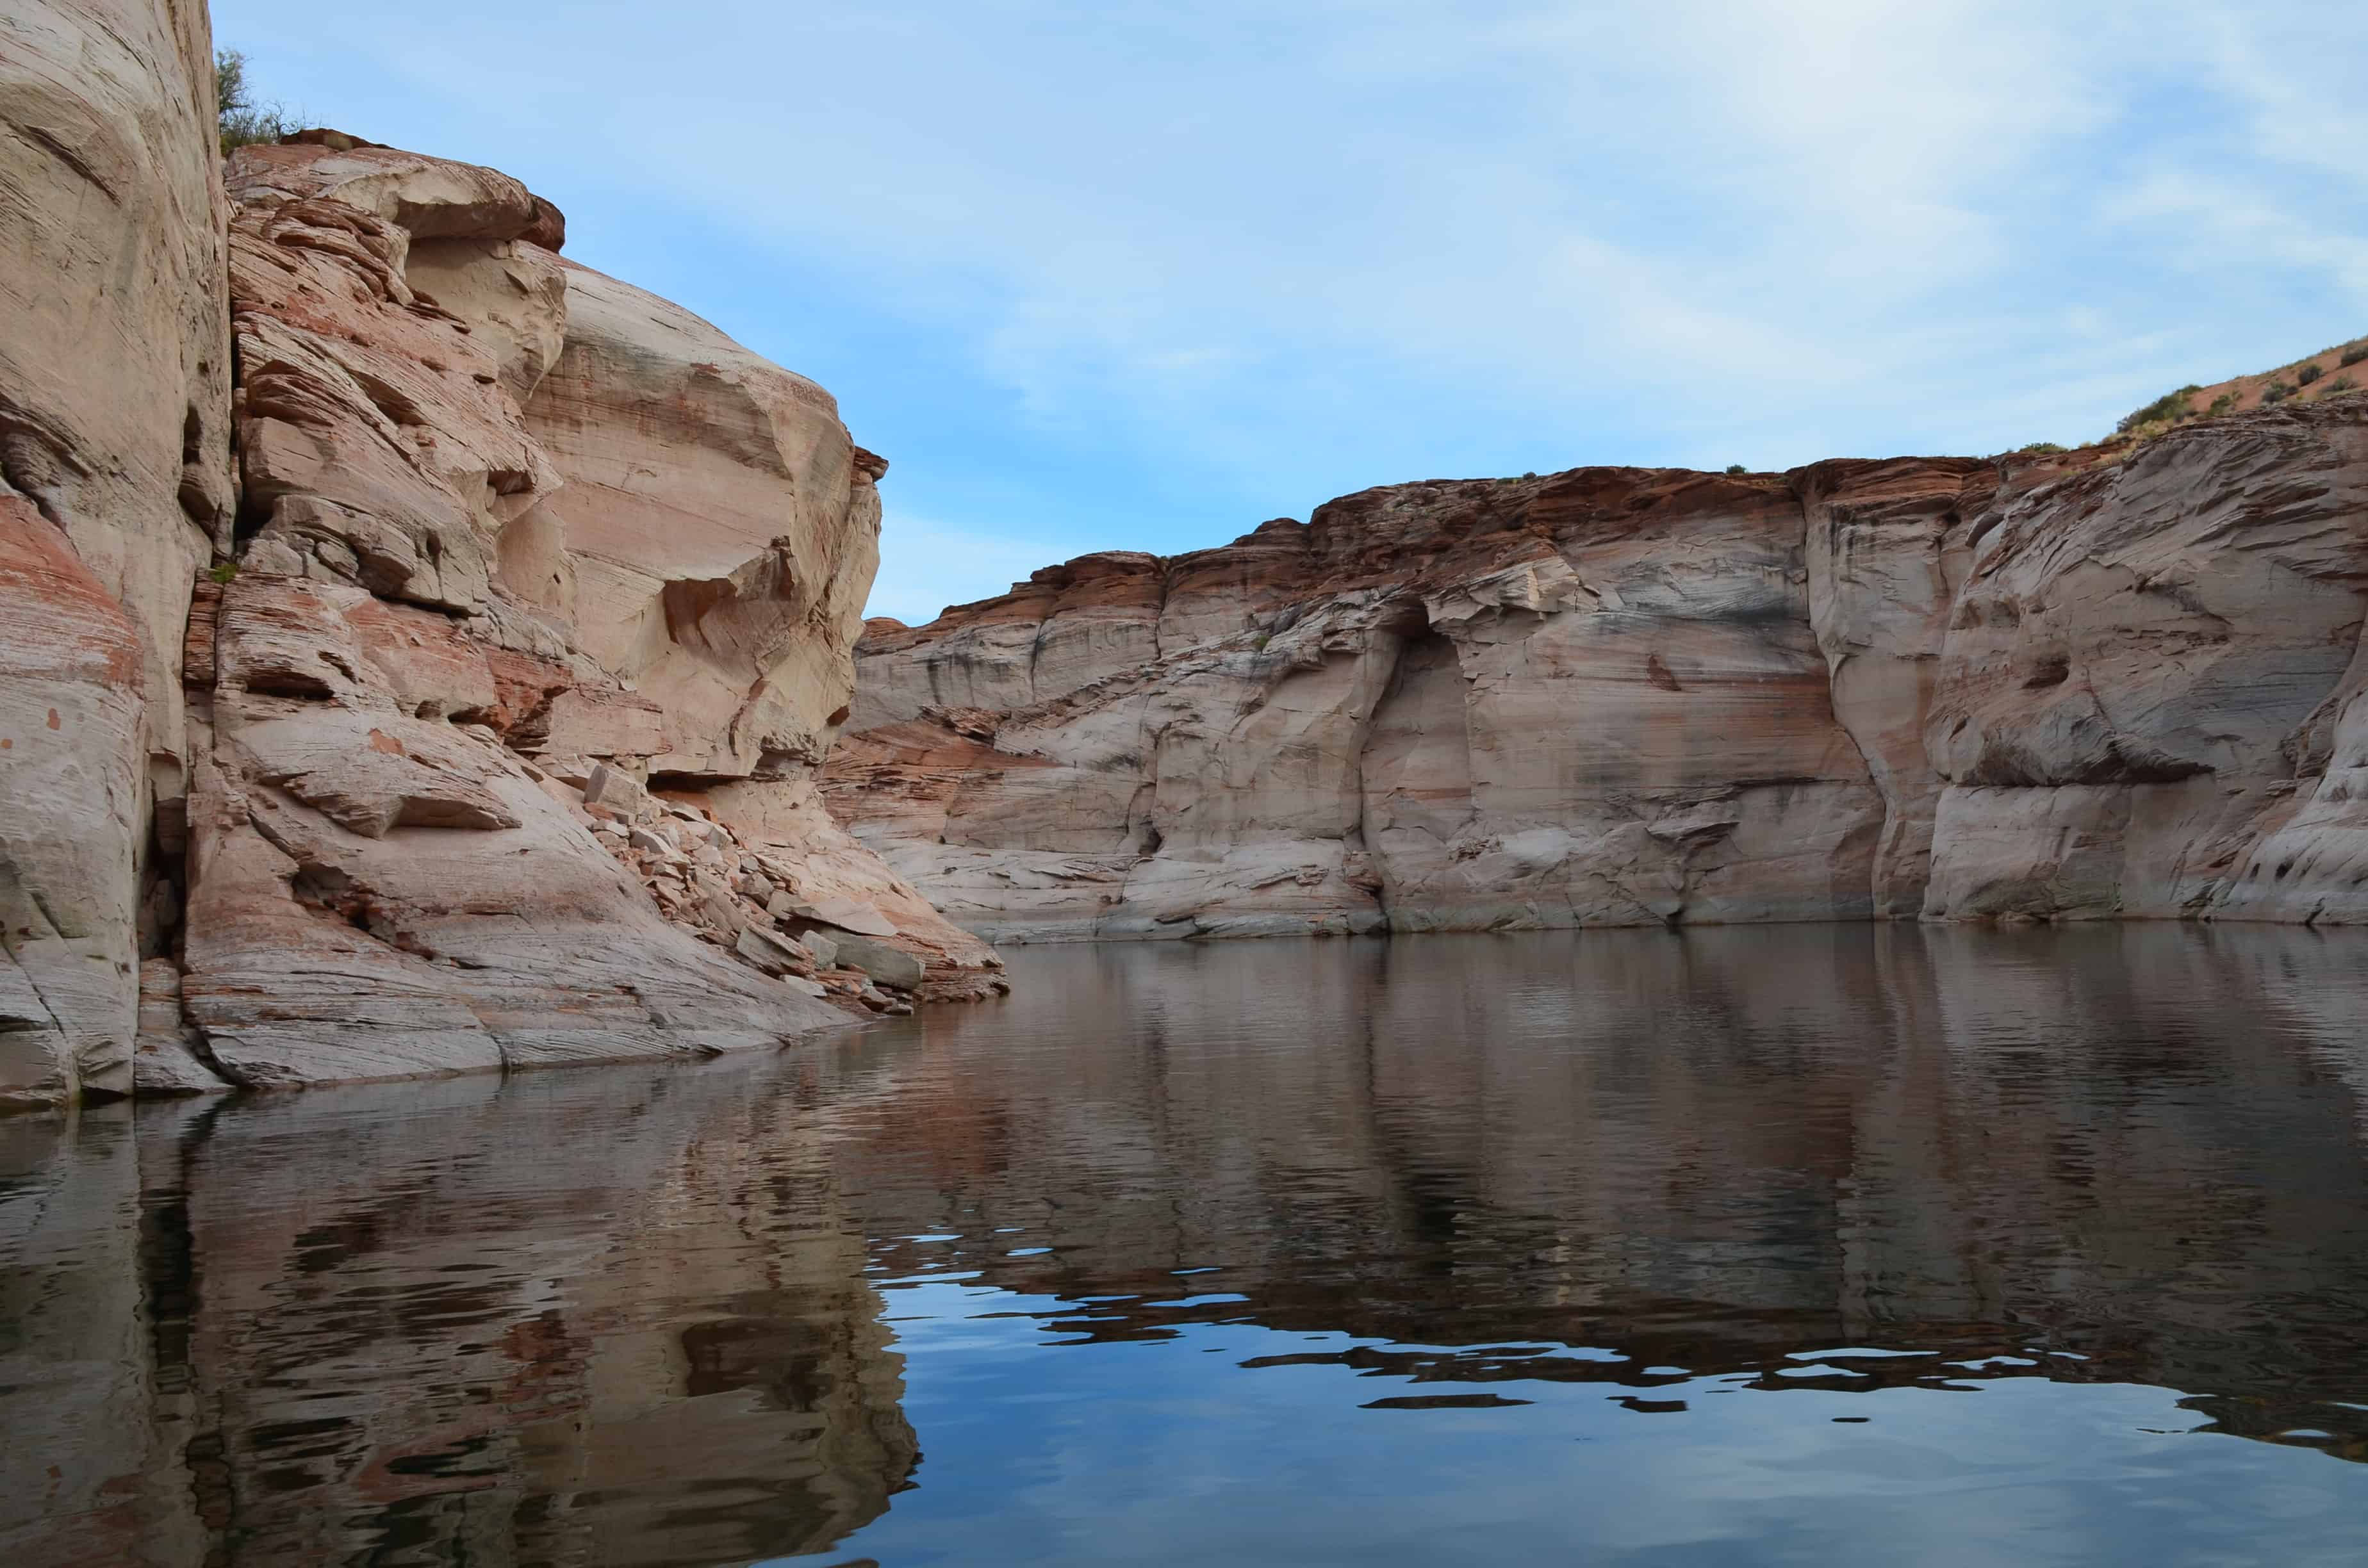 Entering the canyon on Lake Powell at Glen Canyon National Recreation Area in Arizona